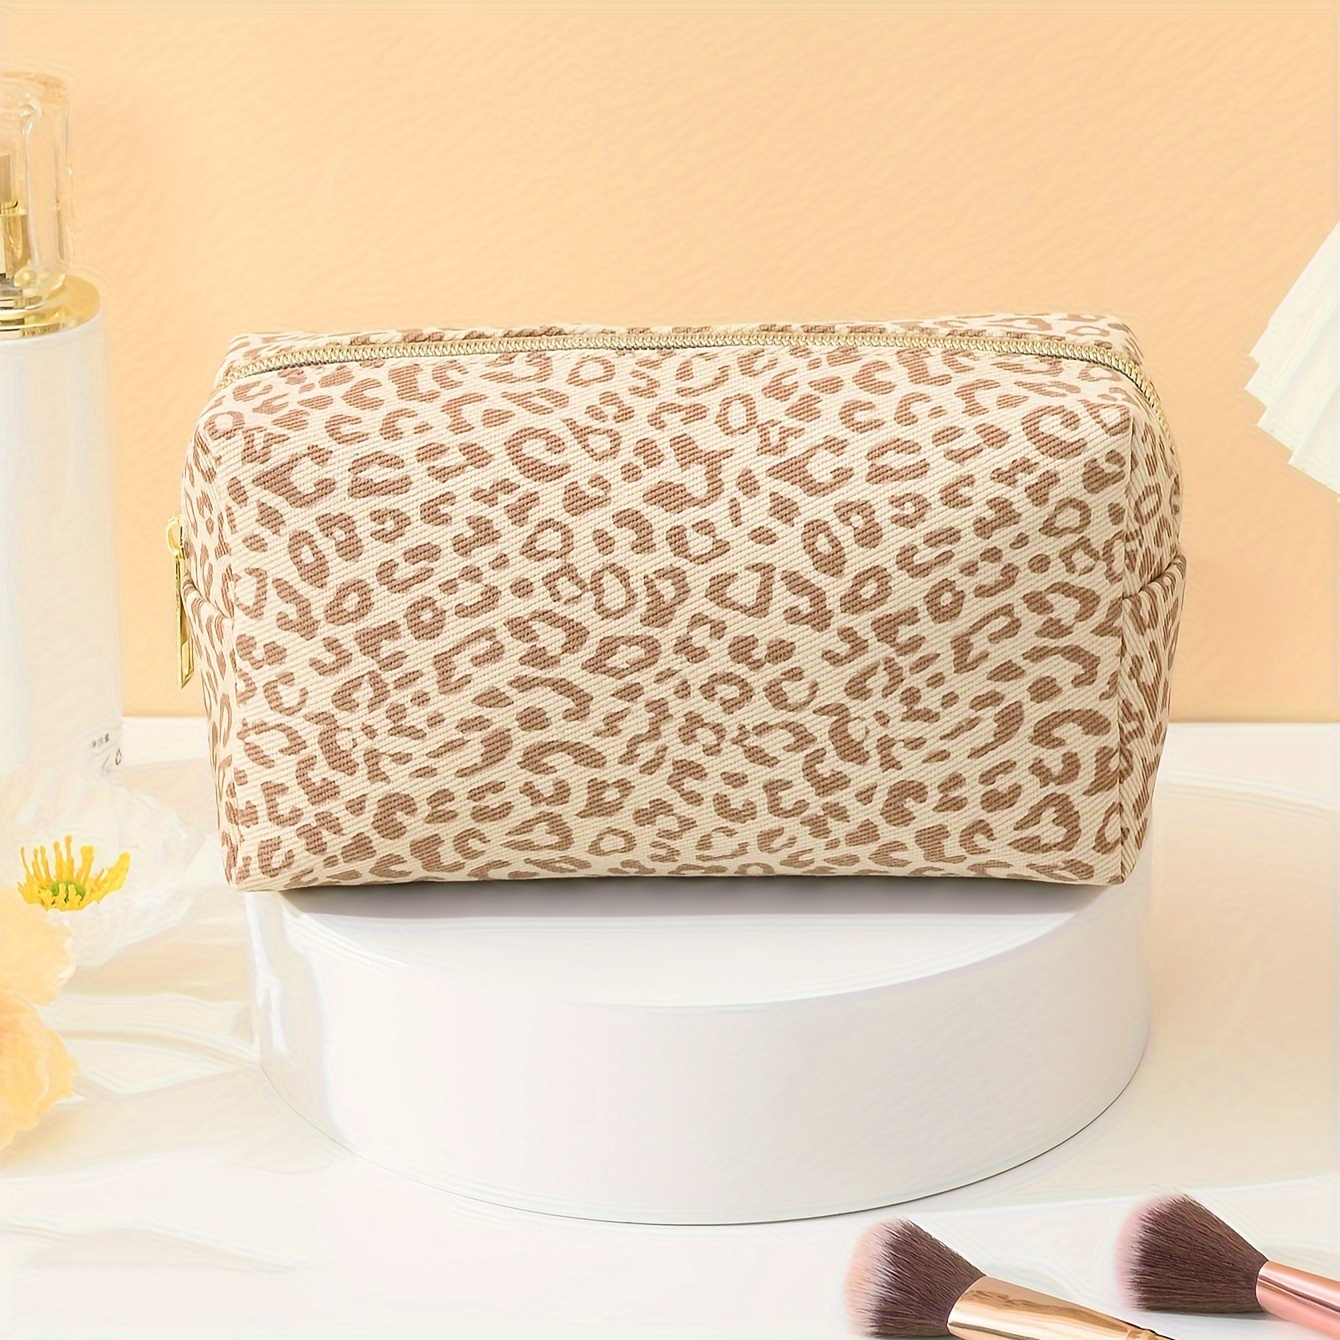 

Leopard Print Canvas Makeup Bag, Large Capacity Fashion Portable Cosmetics Bag With Zipper, Stylish Travel Cosmetic Pouch